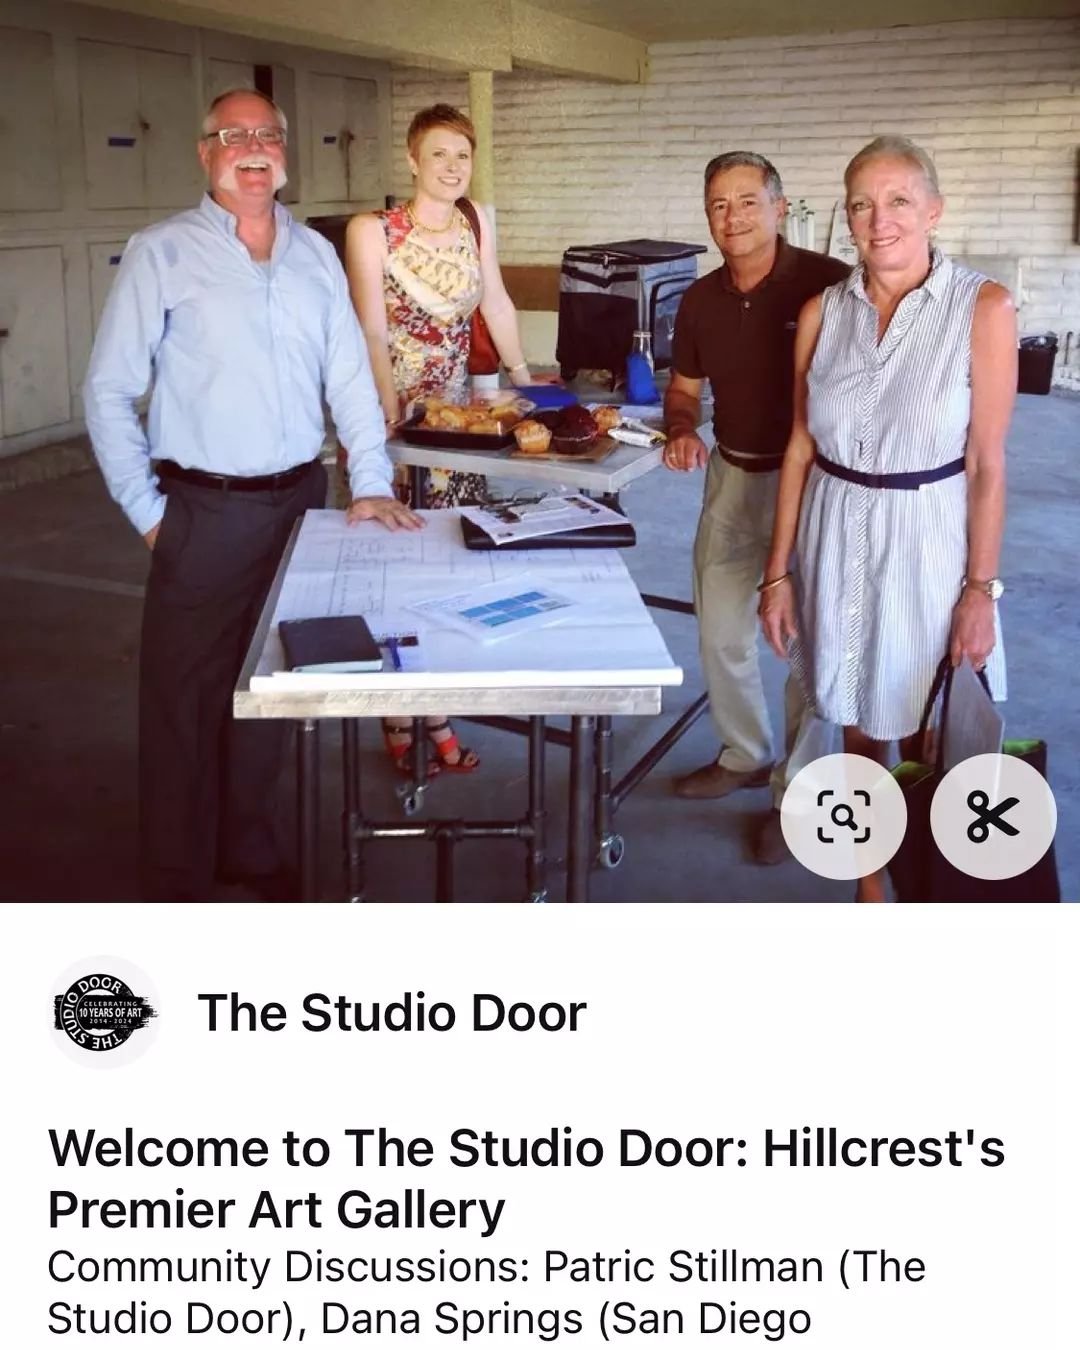 Did you know that The Studio Door uses Pinterest to document our activities? &nbsp;Here is one of the first posts using Pinterest in 2014 when Patric Stillman met with San Diego's Key Arts leaders to discuss plans for The Studio Door's launch.

10th 